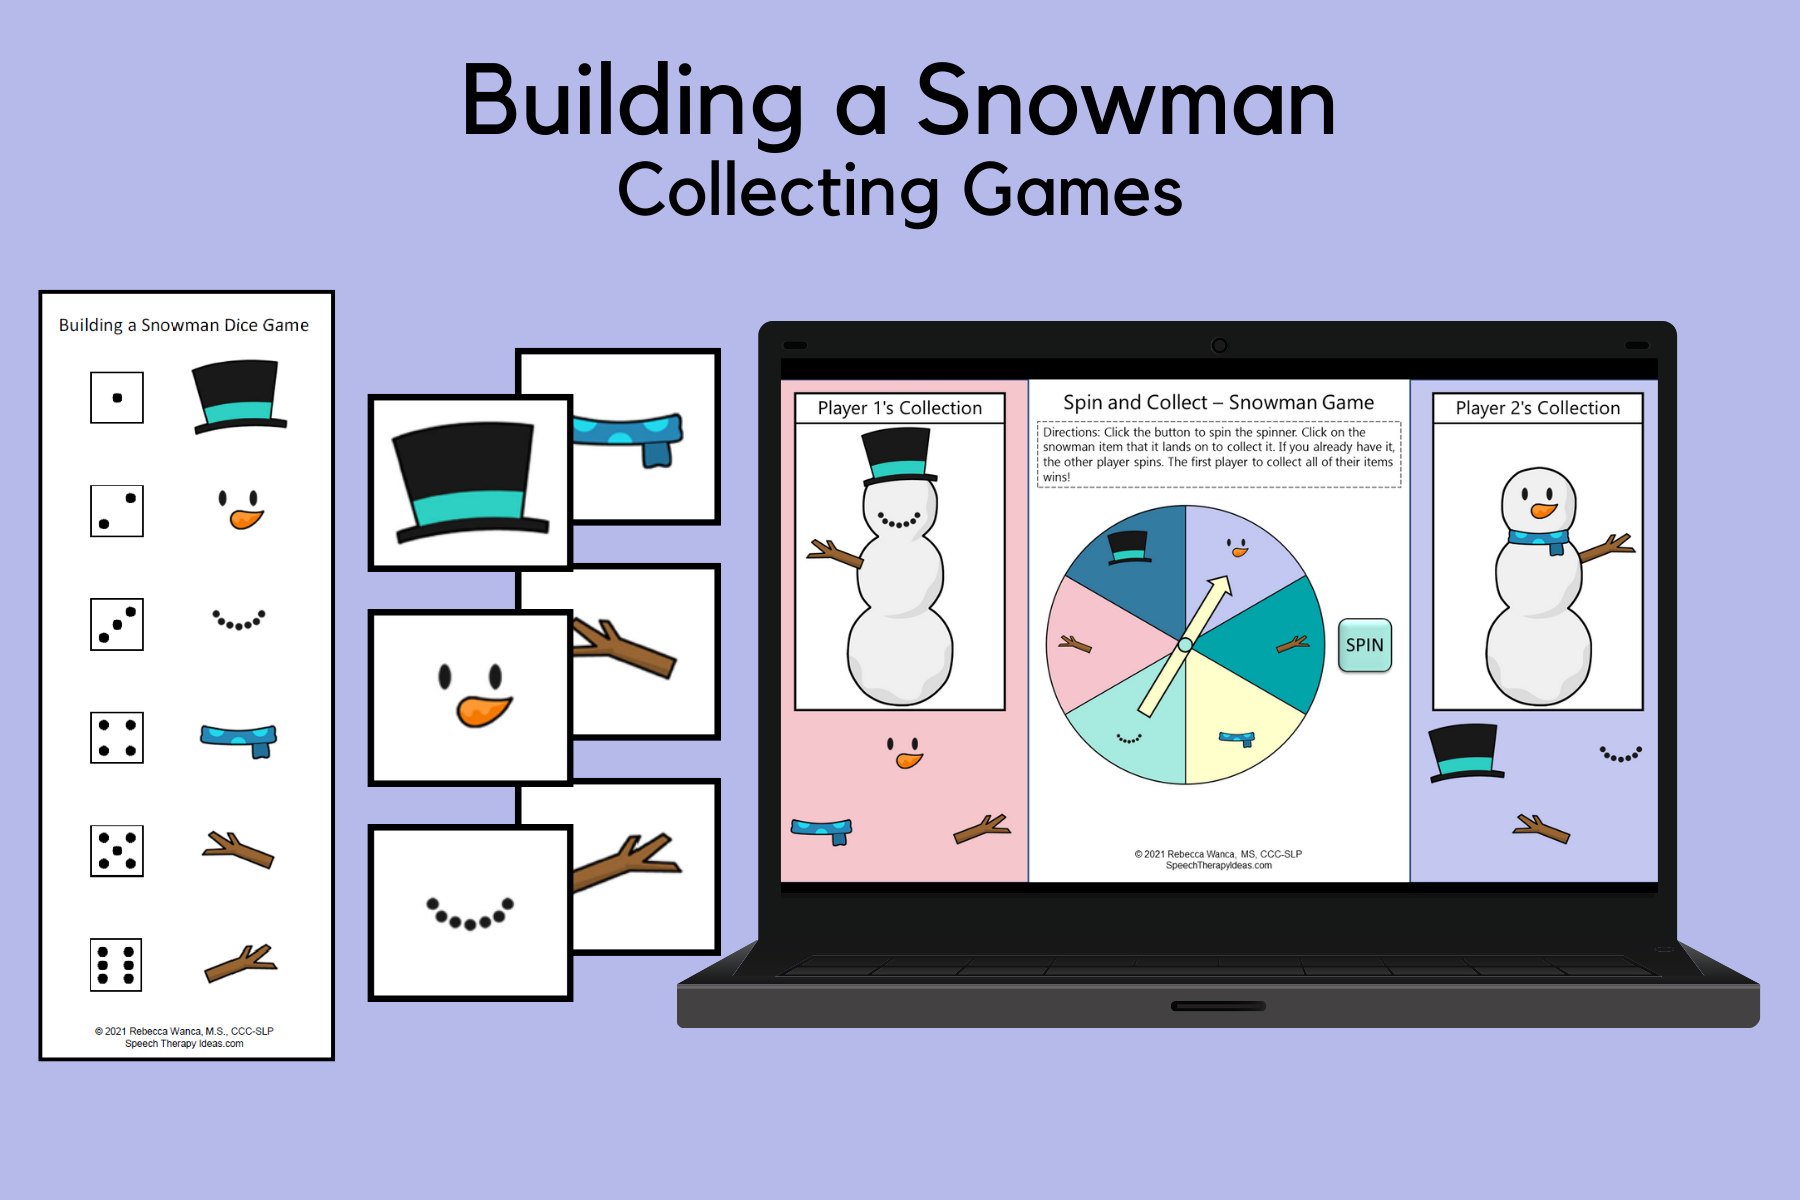 Building a Snowman Collecting Games